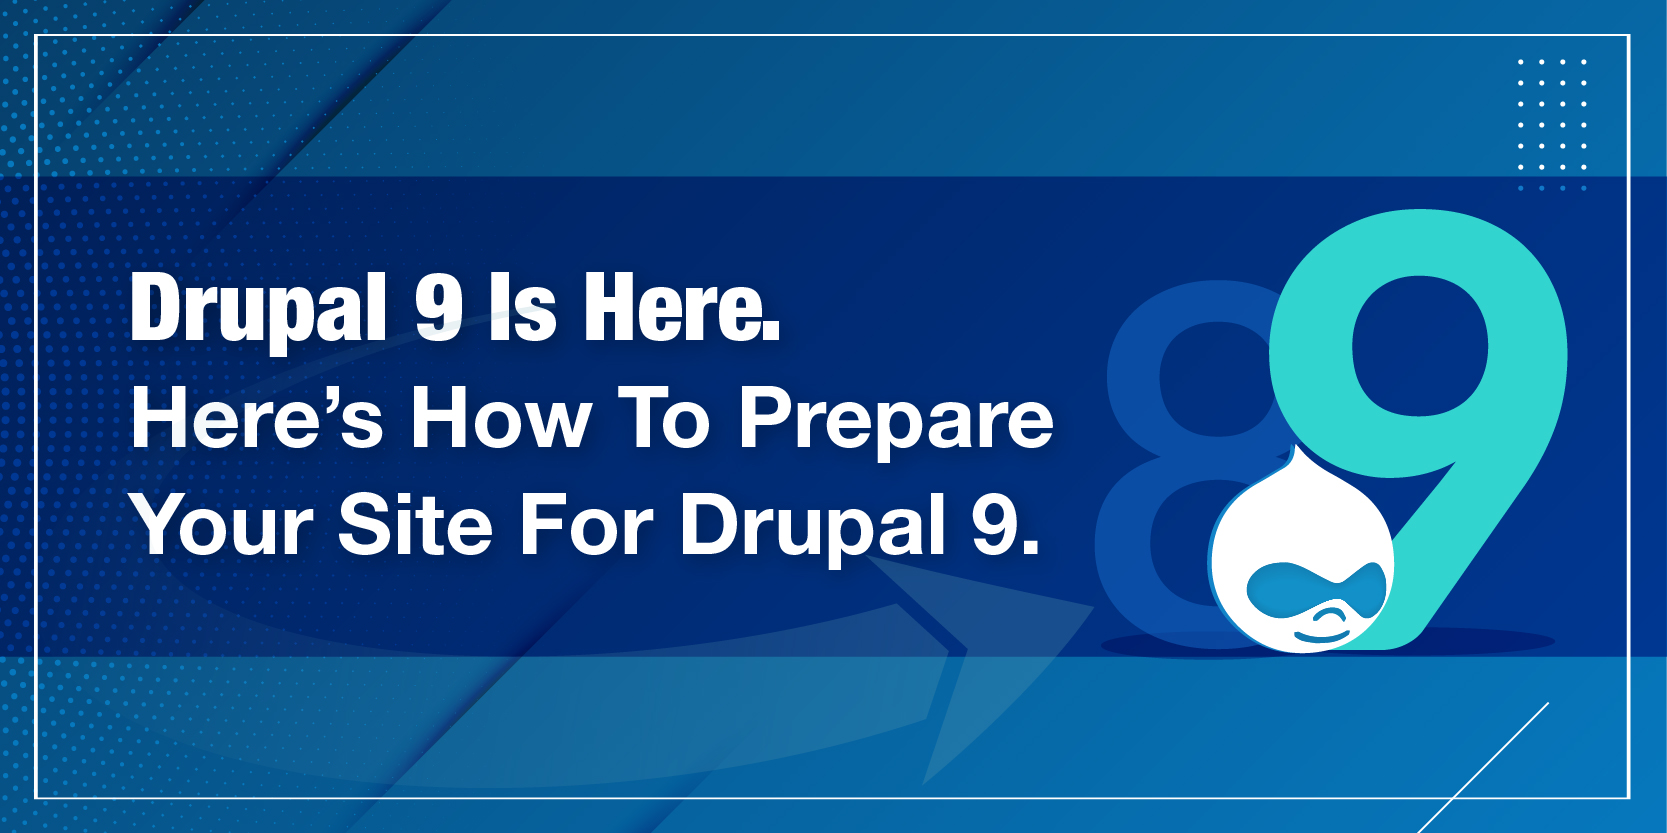 Drupal 9 Is Here. Here’s How To Prepare Your Site For Drupal 9